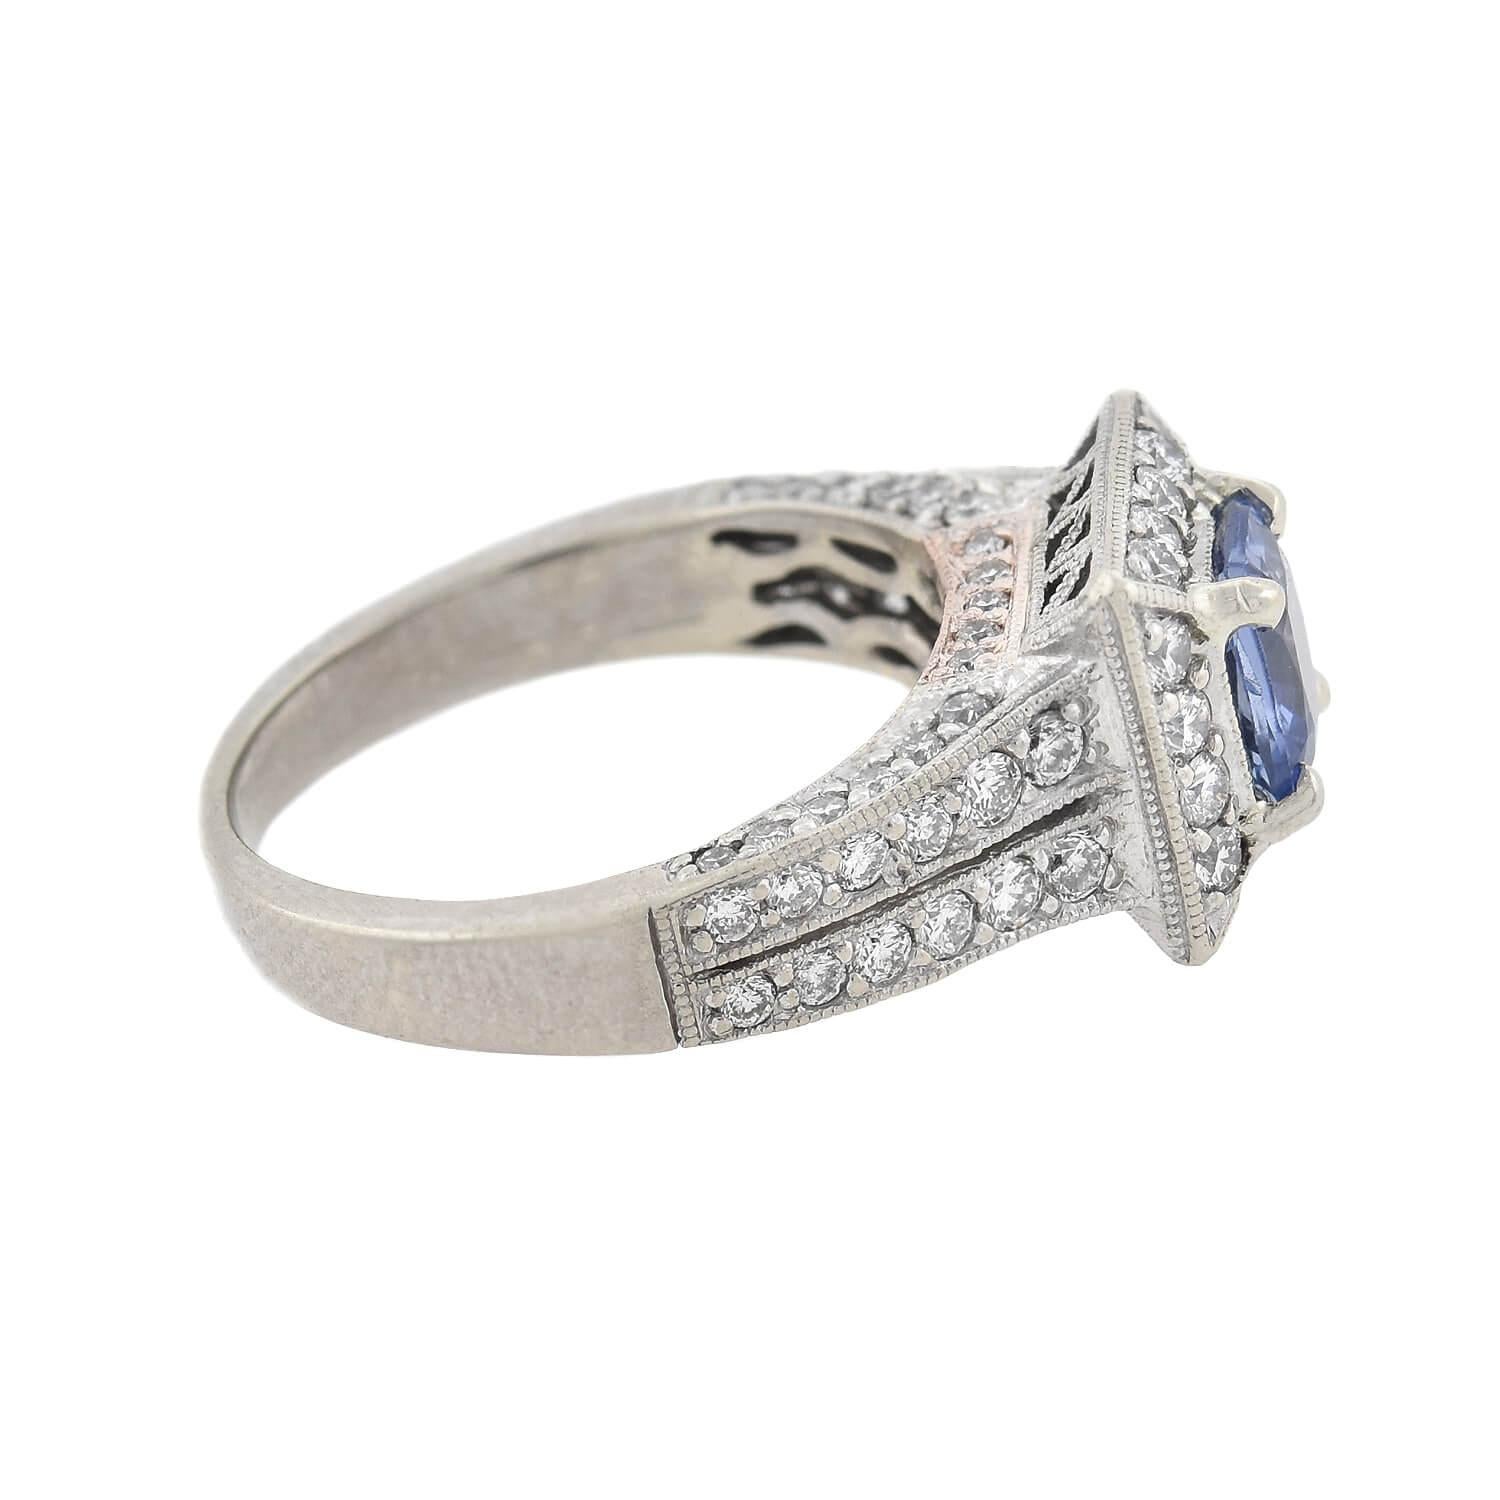 A lovely sapphire and diamond ring! Crafted in 14kt white gold, this beautiful piece features a Cushion Cut sapphire resting within a square diamond halo. The sapphire emits a lovely cornflower blue hue and has a total approximate weight of 0.90ctw.